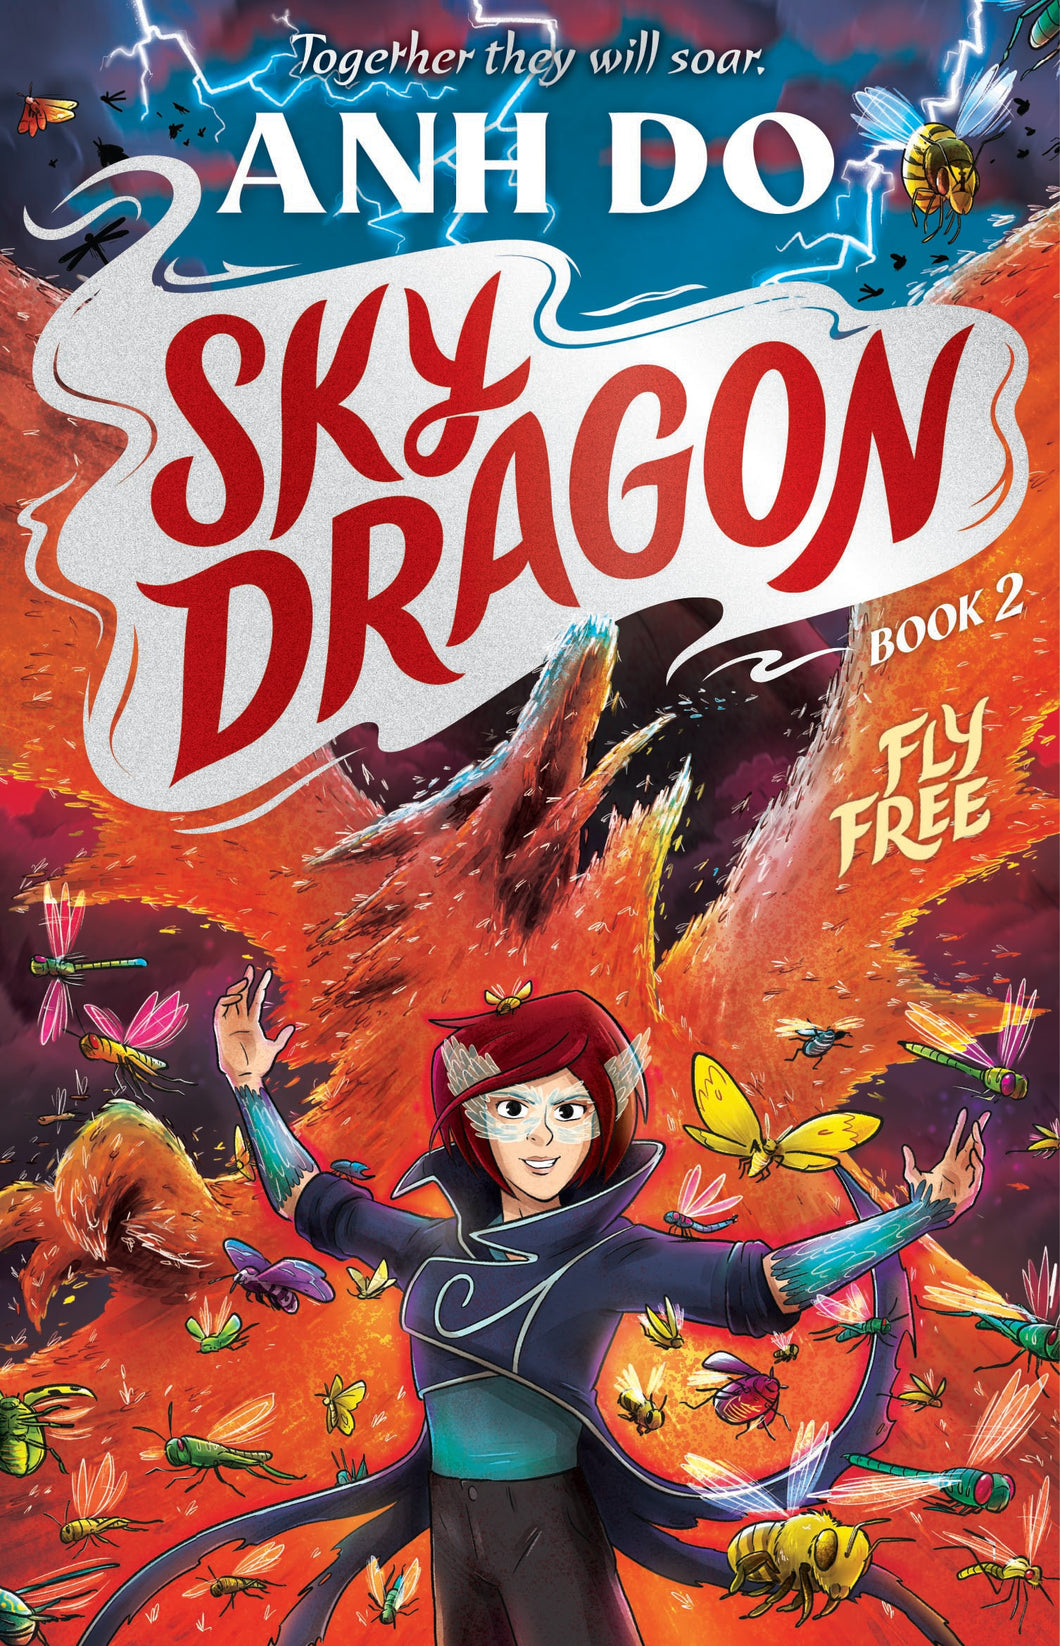 Sky Dragon 2: Fly Free by Anh Do